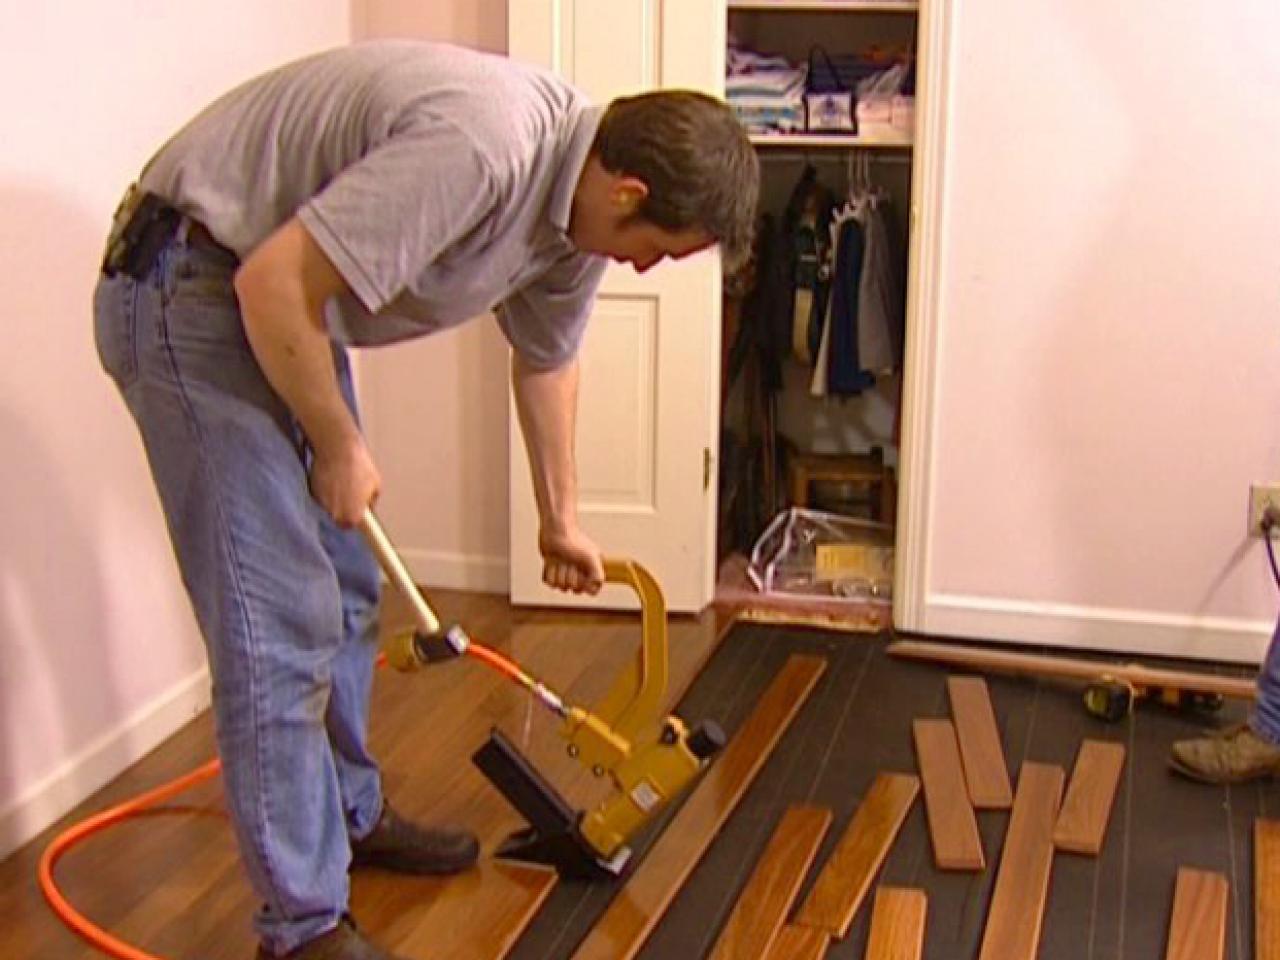 How To Install A Hardwood Floor, Can You Use Tar Paper Under Laminate Flooring